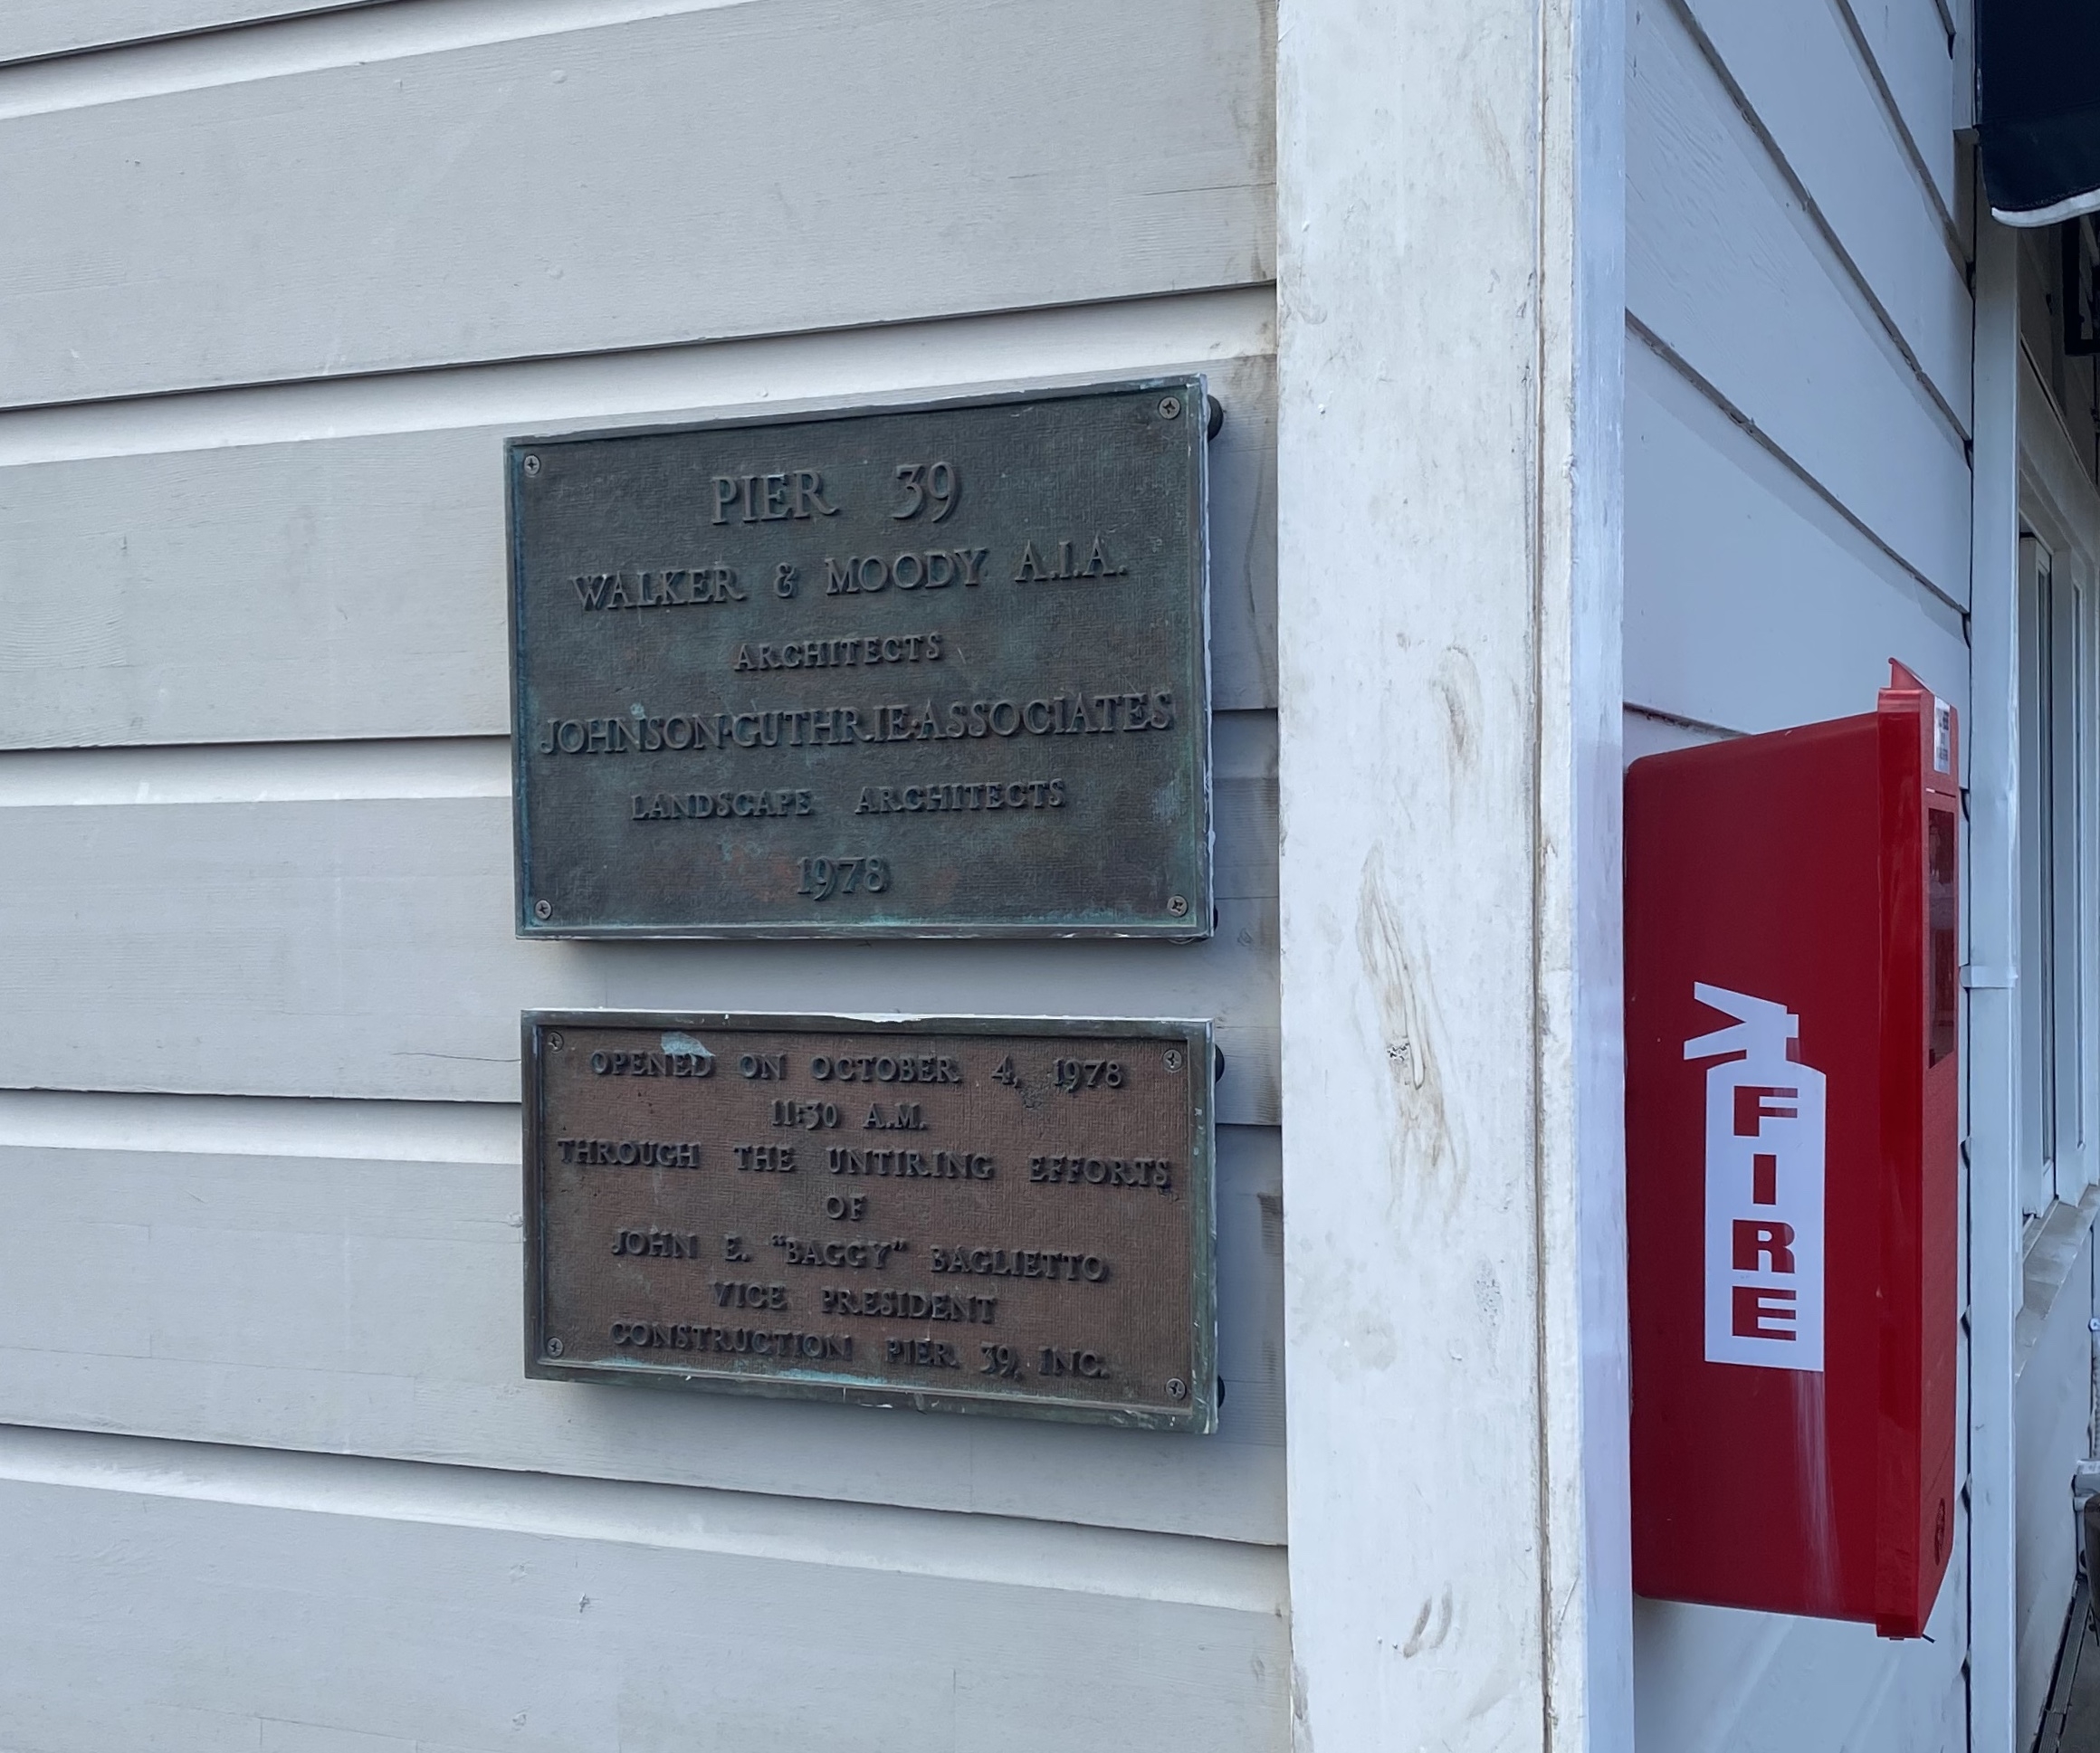 Construction and Opening Day Plaques